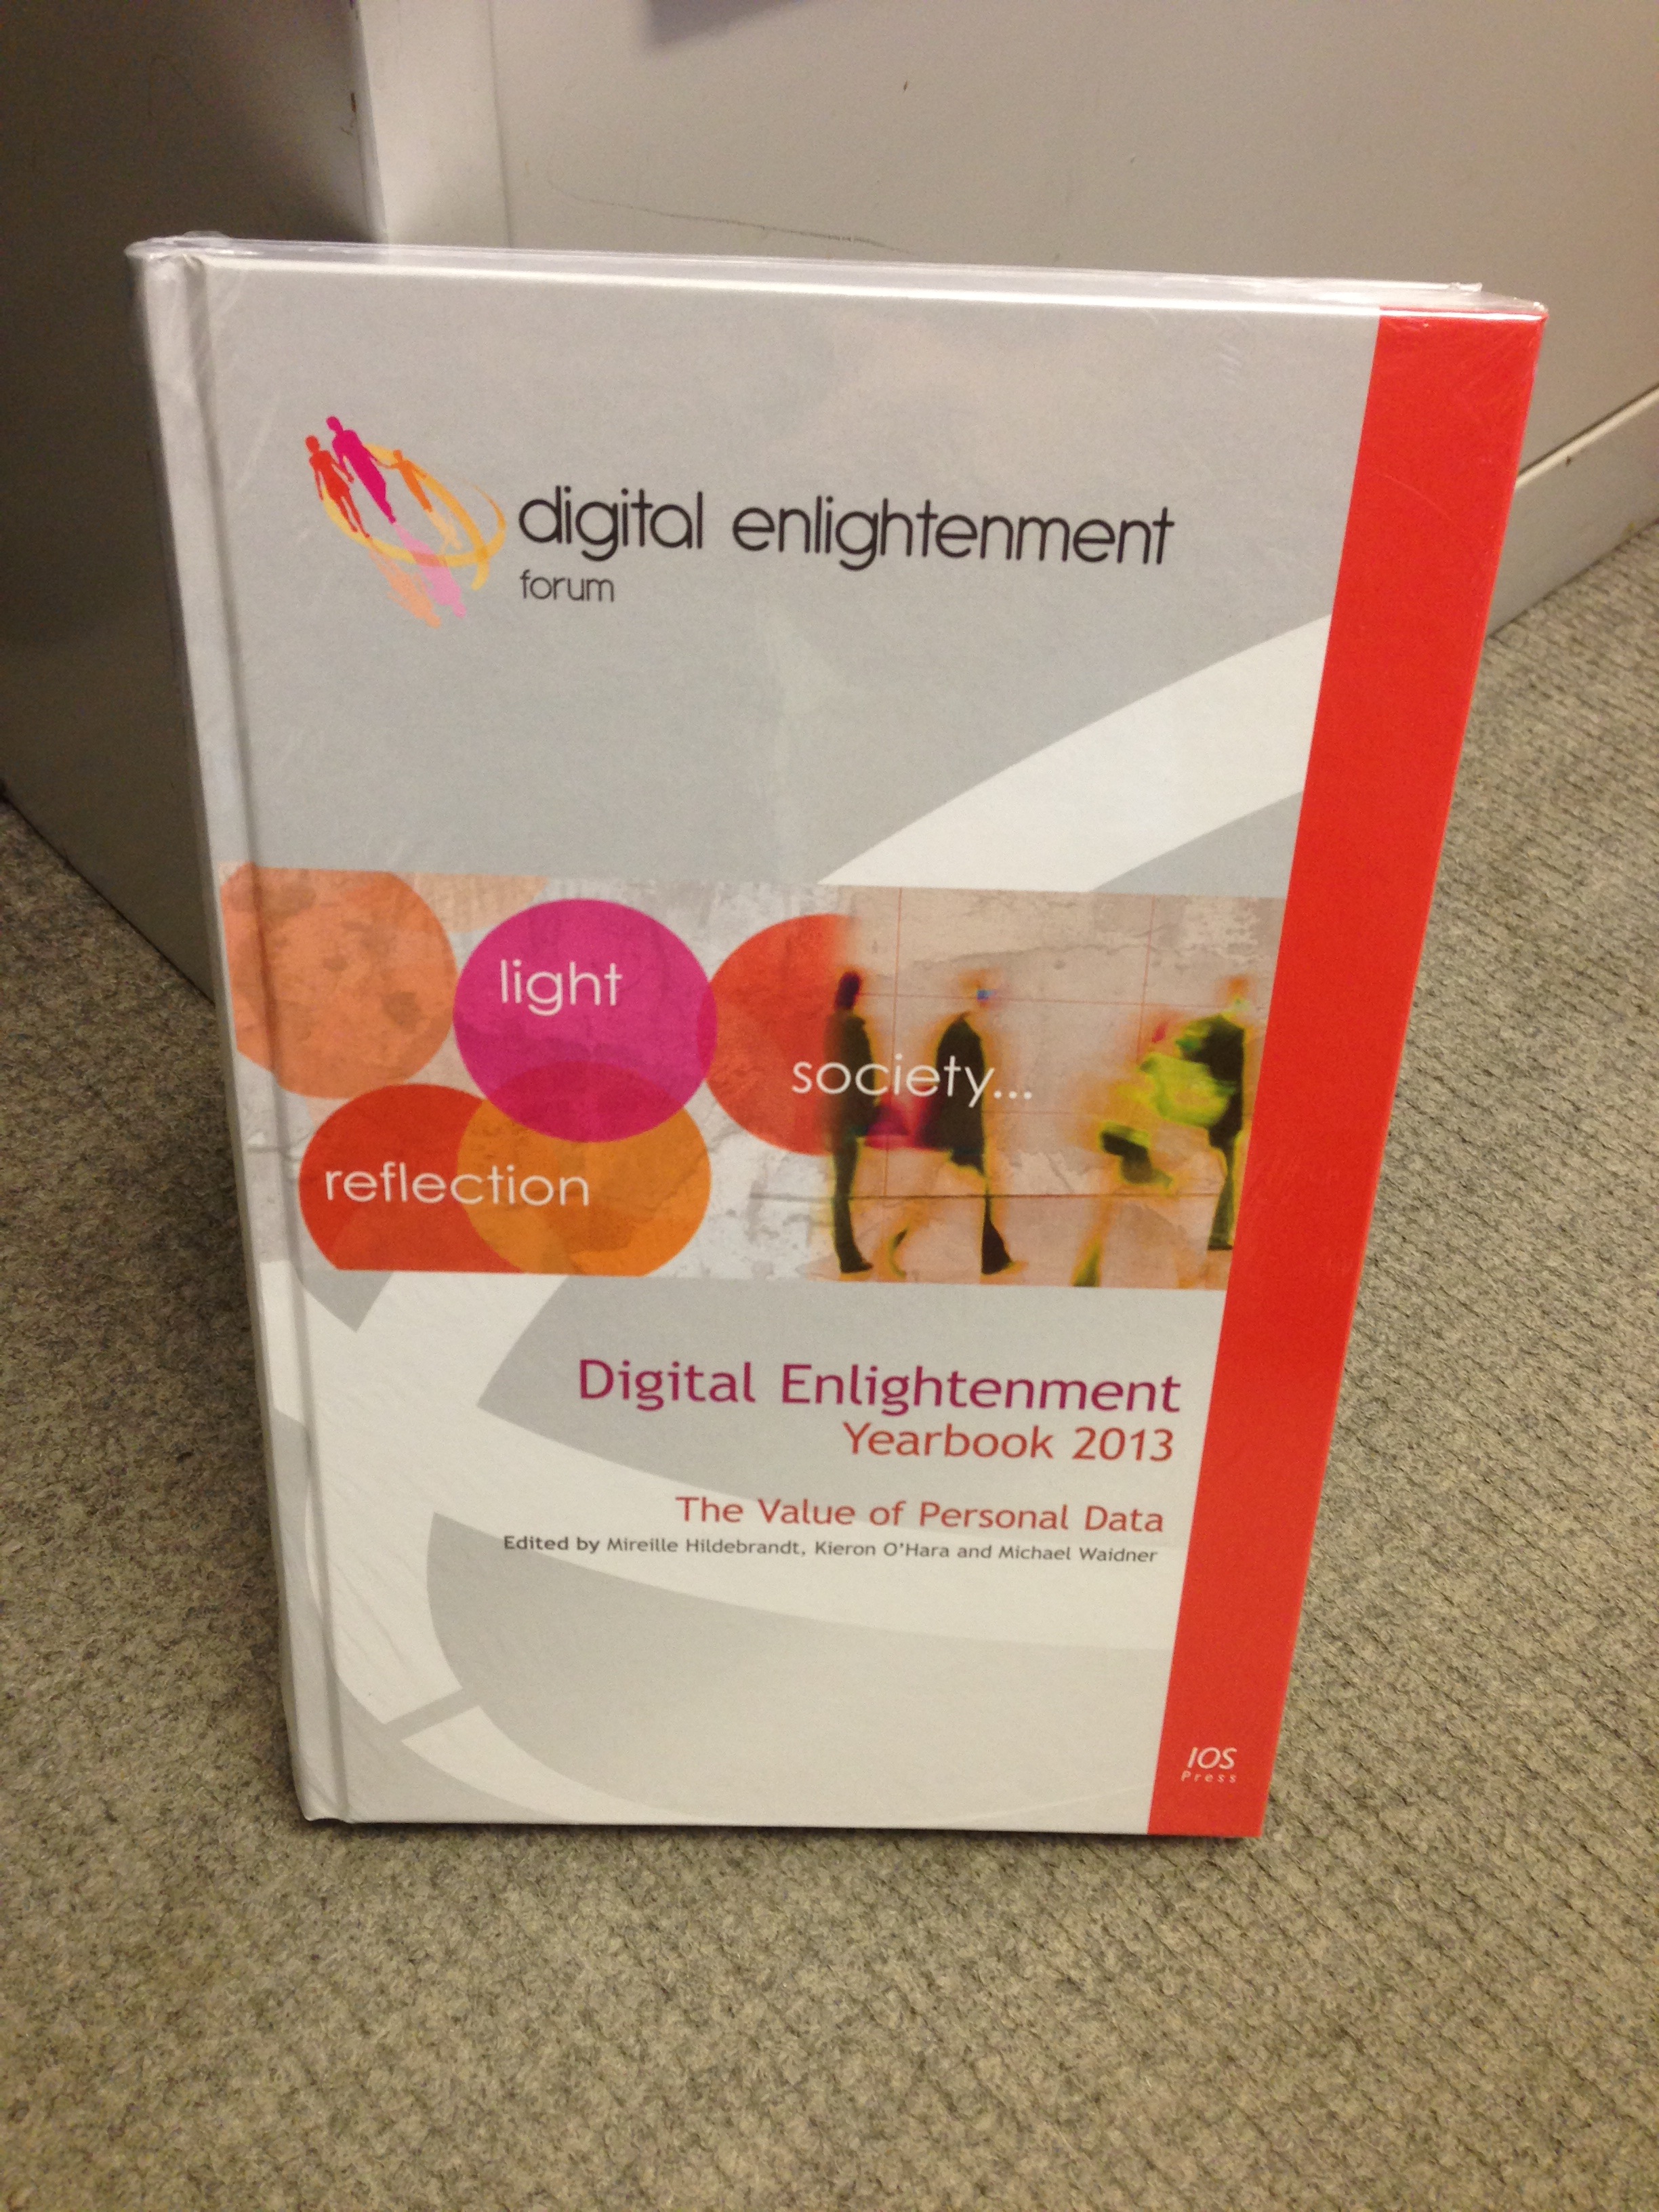 Picture of the Digital Enlightenment Yearbook 2013